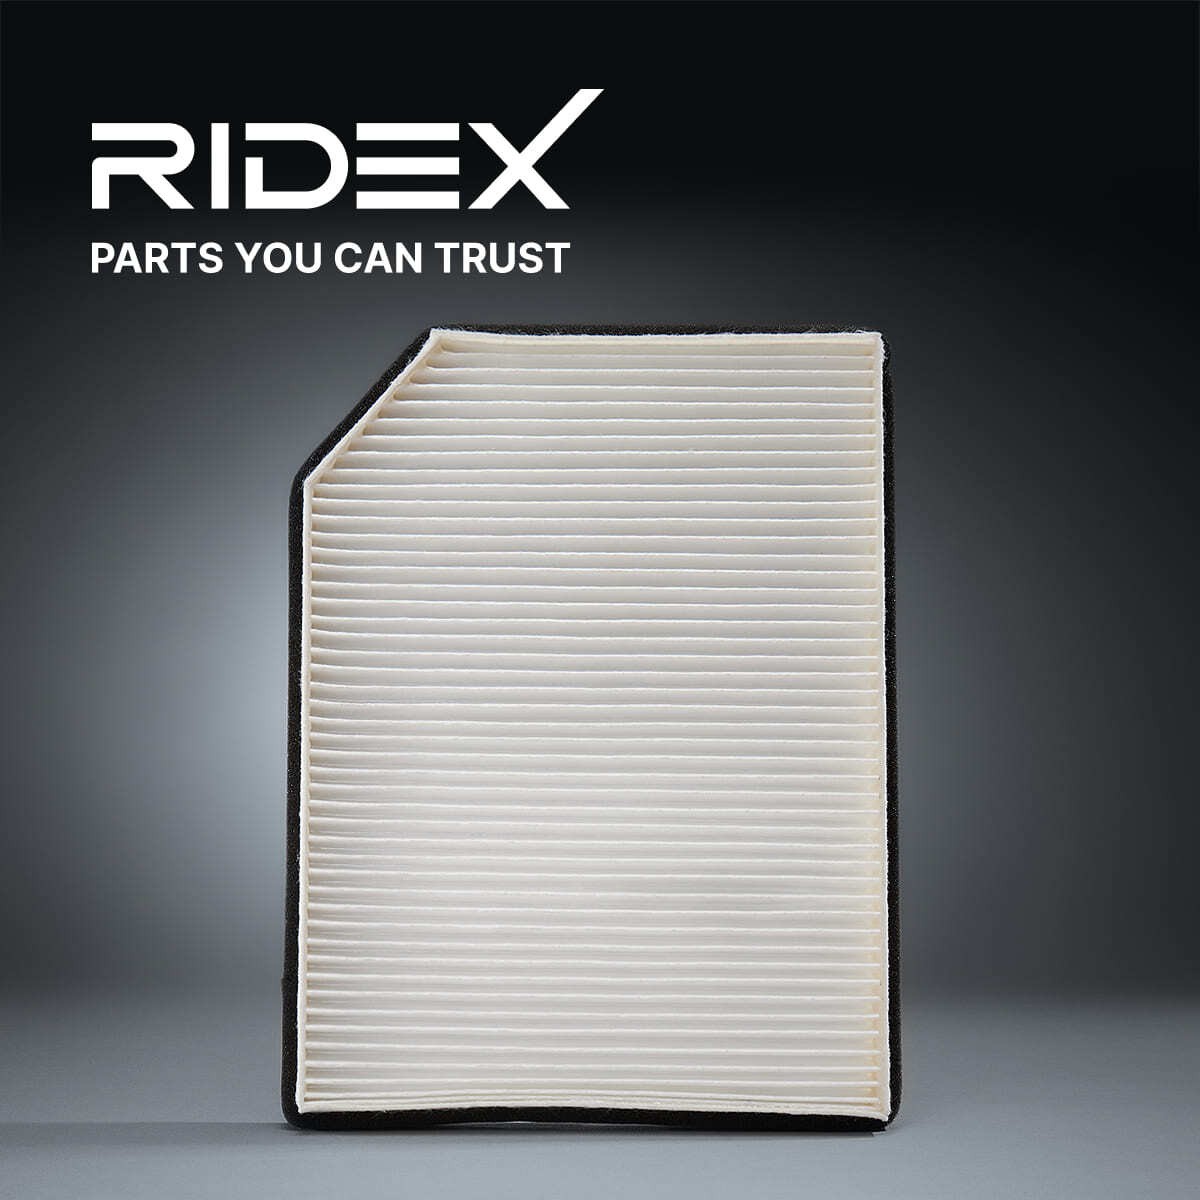 RIDEX 424I0191 Air conditioner filter Activated Carbon Filter, Filter Insert, with Odour Absorbent Effect, 250 mm x 182 mm x 30 mm